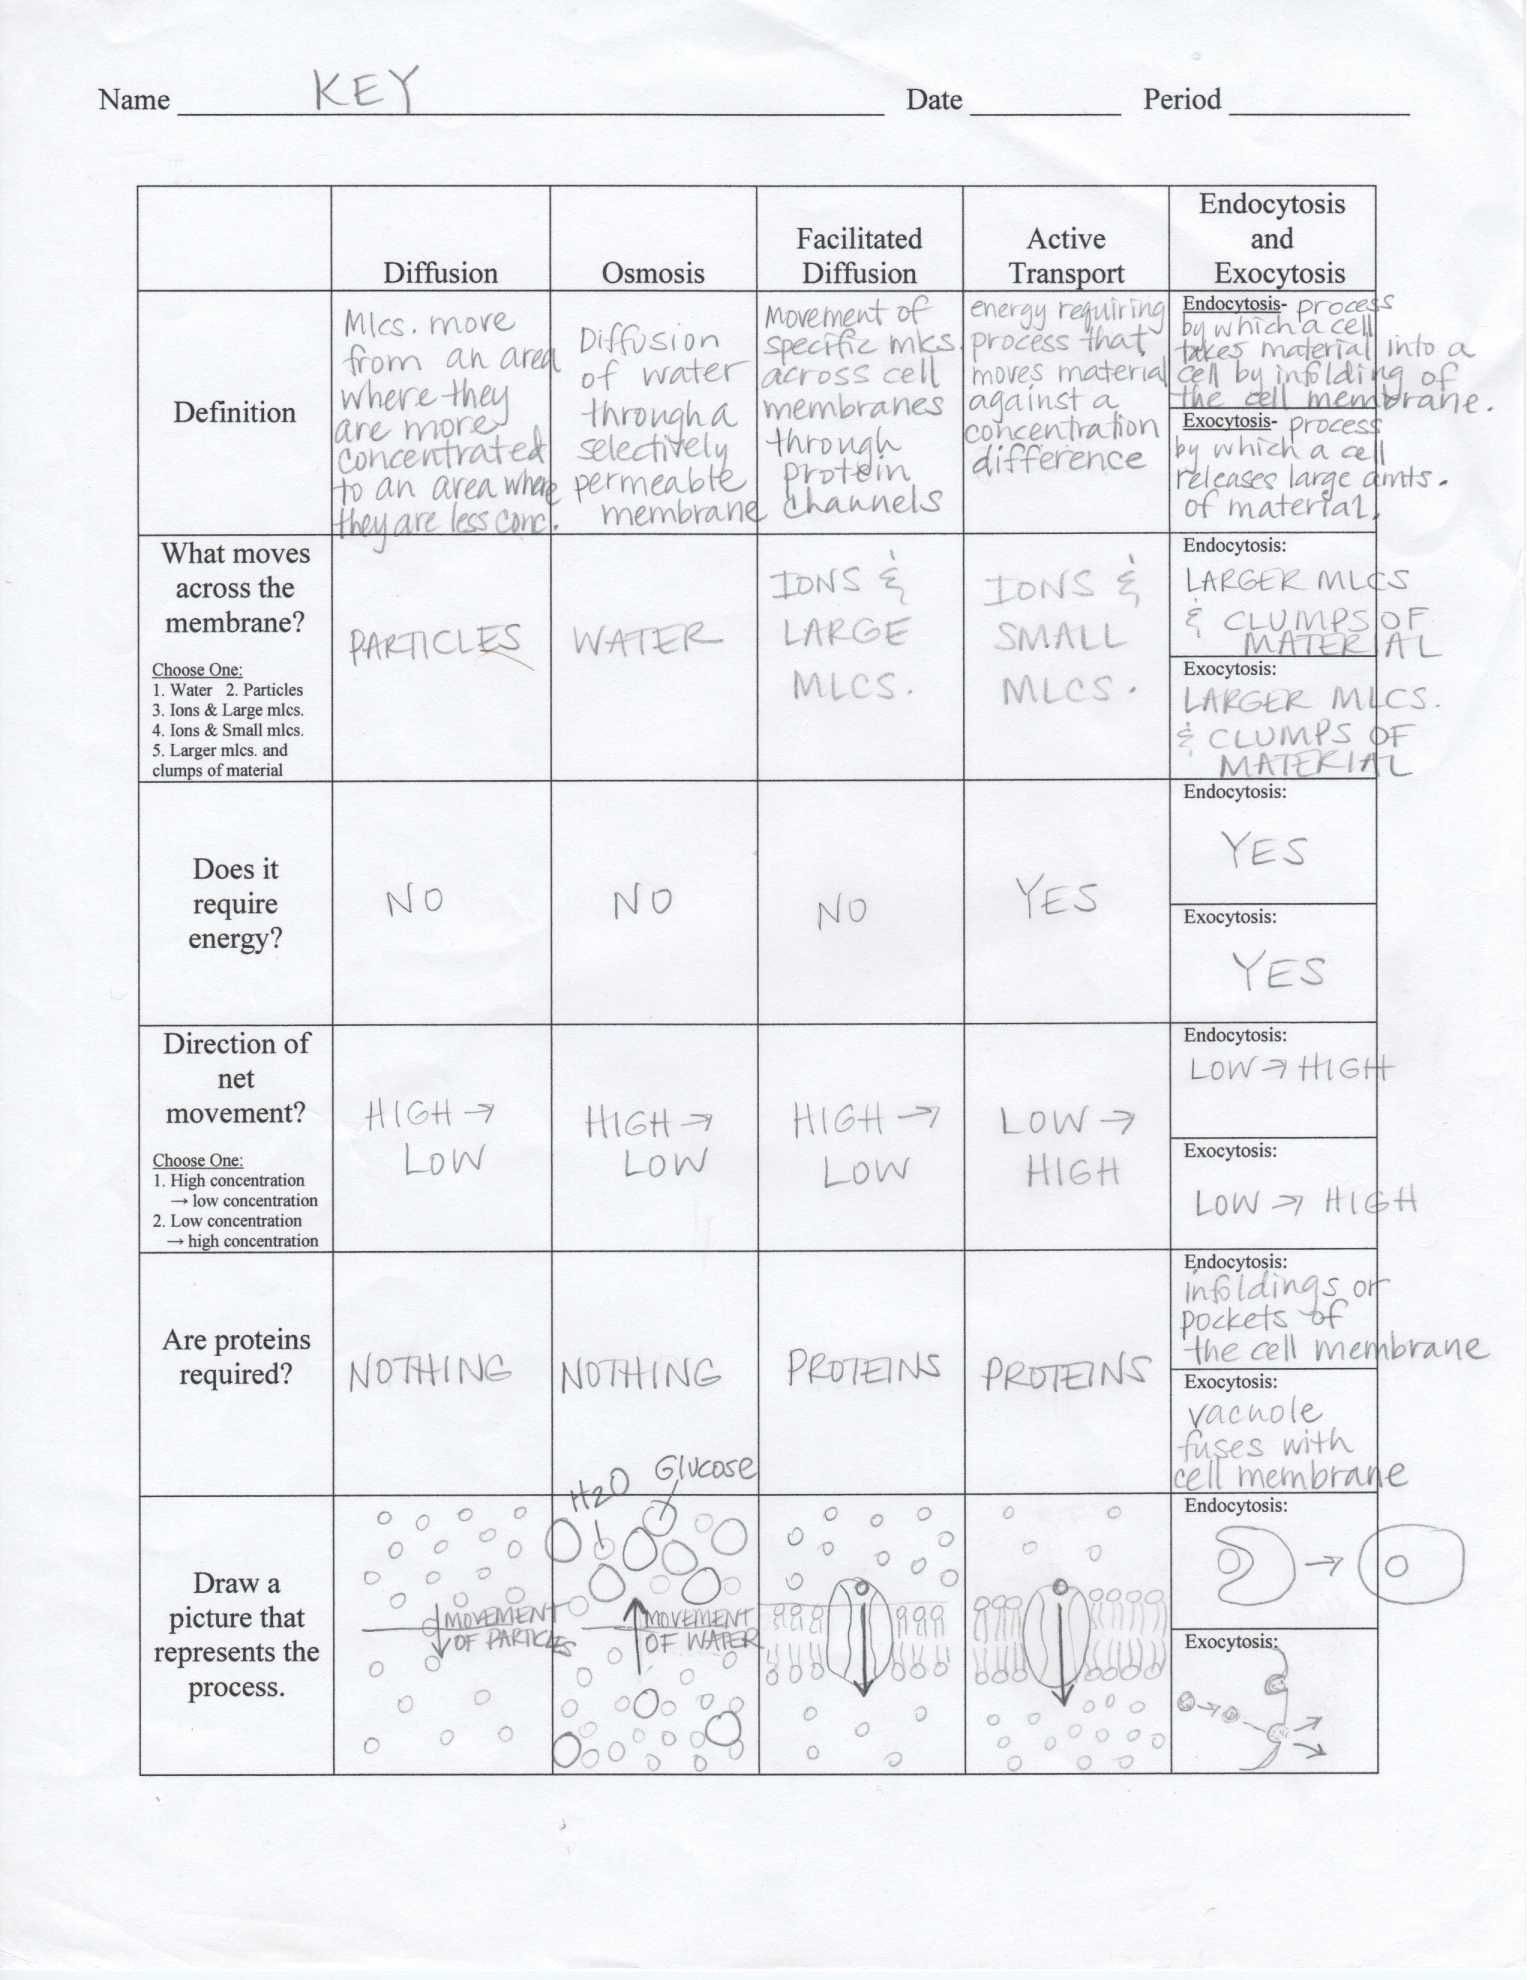 Mouse Party Worksheet Answers db excel com